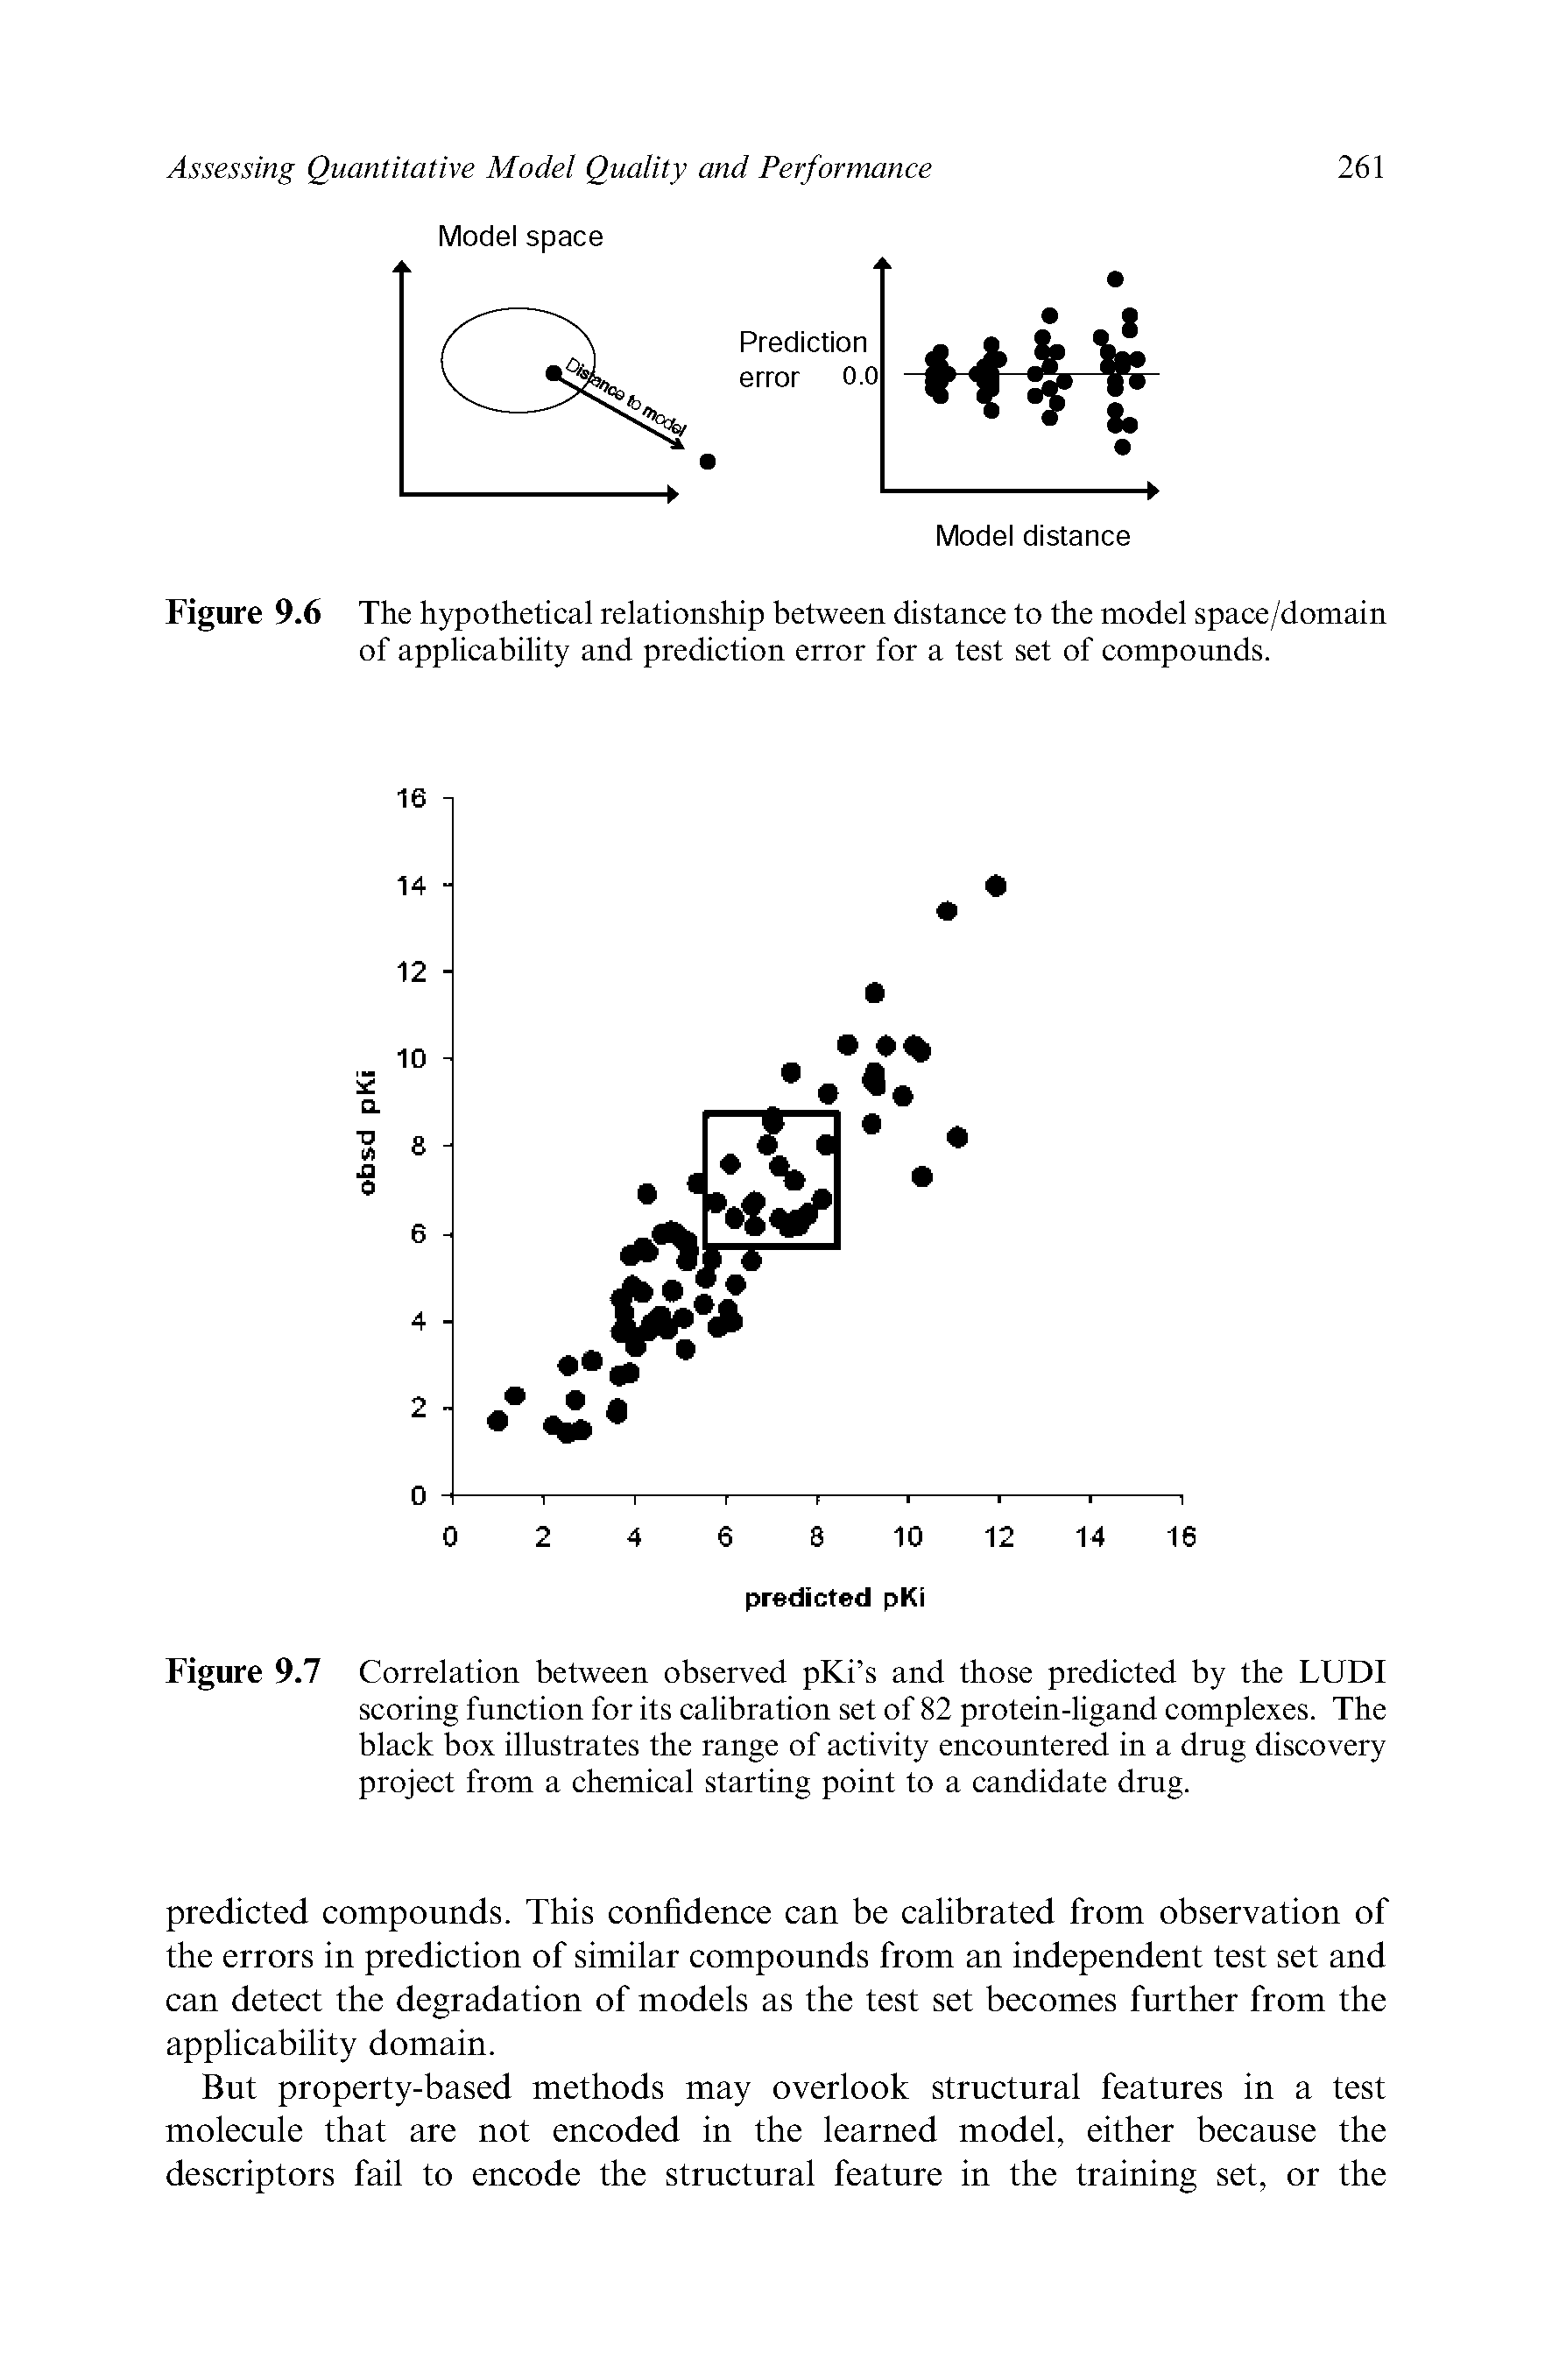 Figure 9.6 The hypothetical relationship between distance to the model space/domain of applicability and prediction error for a test set of compounds.